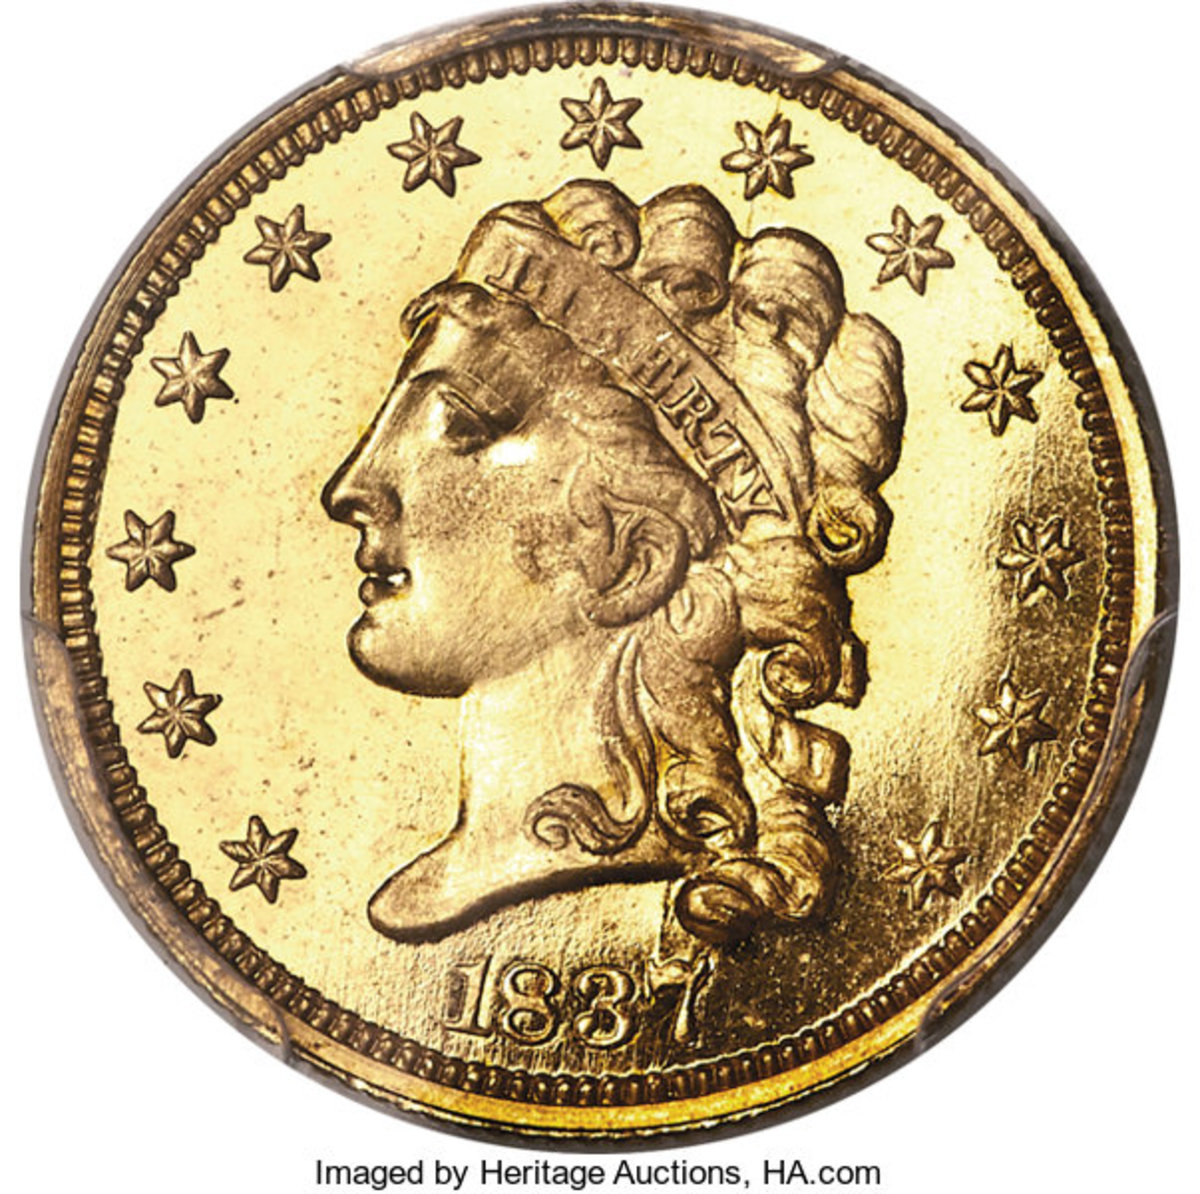 A rare 1837 Classic Head quarter eagle, PR66+ Deep Cameo PCGS CAC is the sole-finest example of this proof-only issue (Variety 18, JD-1, Ex: Parmelee-Eliasberg-Bass).  It sold for $576,000.  (Image courtesy of Heritage Auctions)